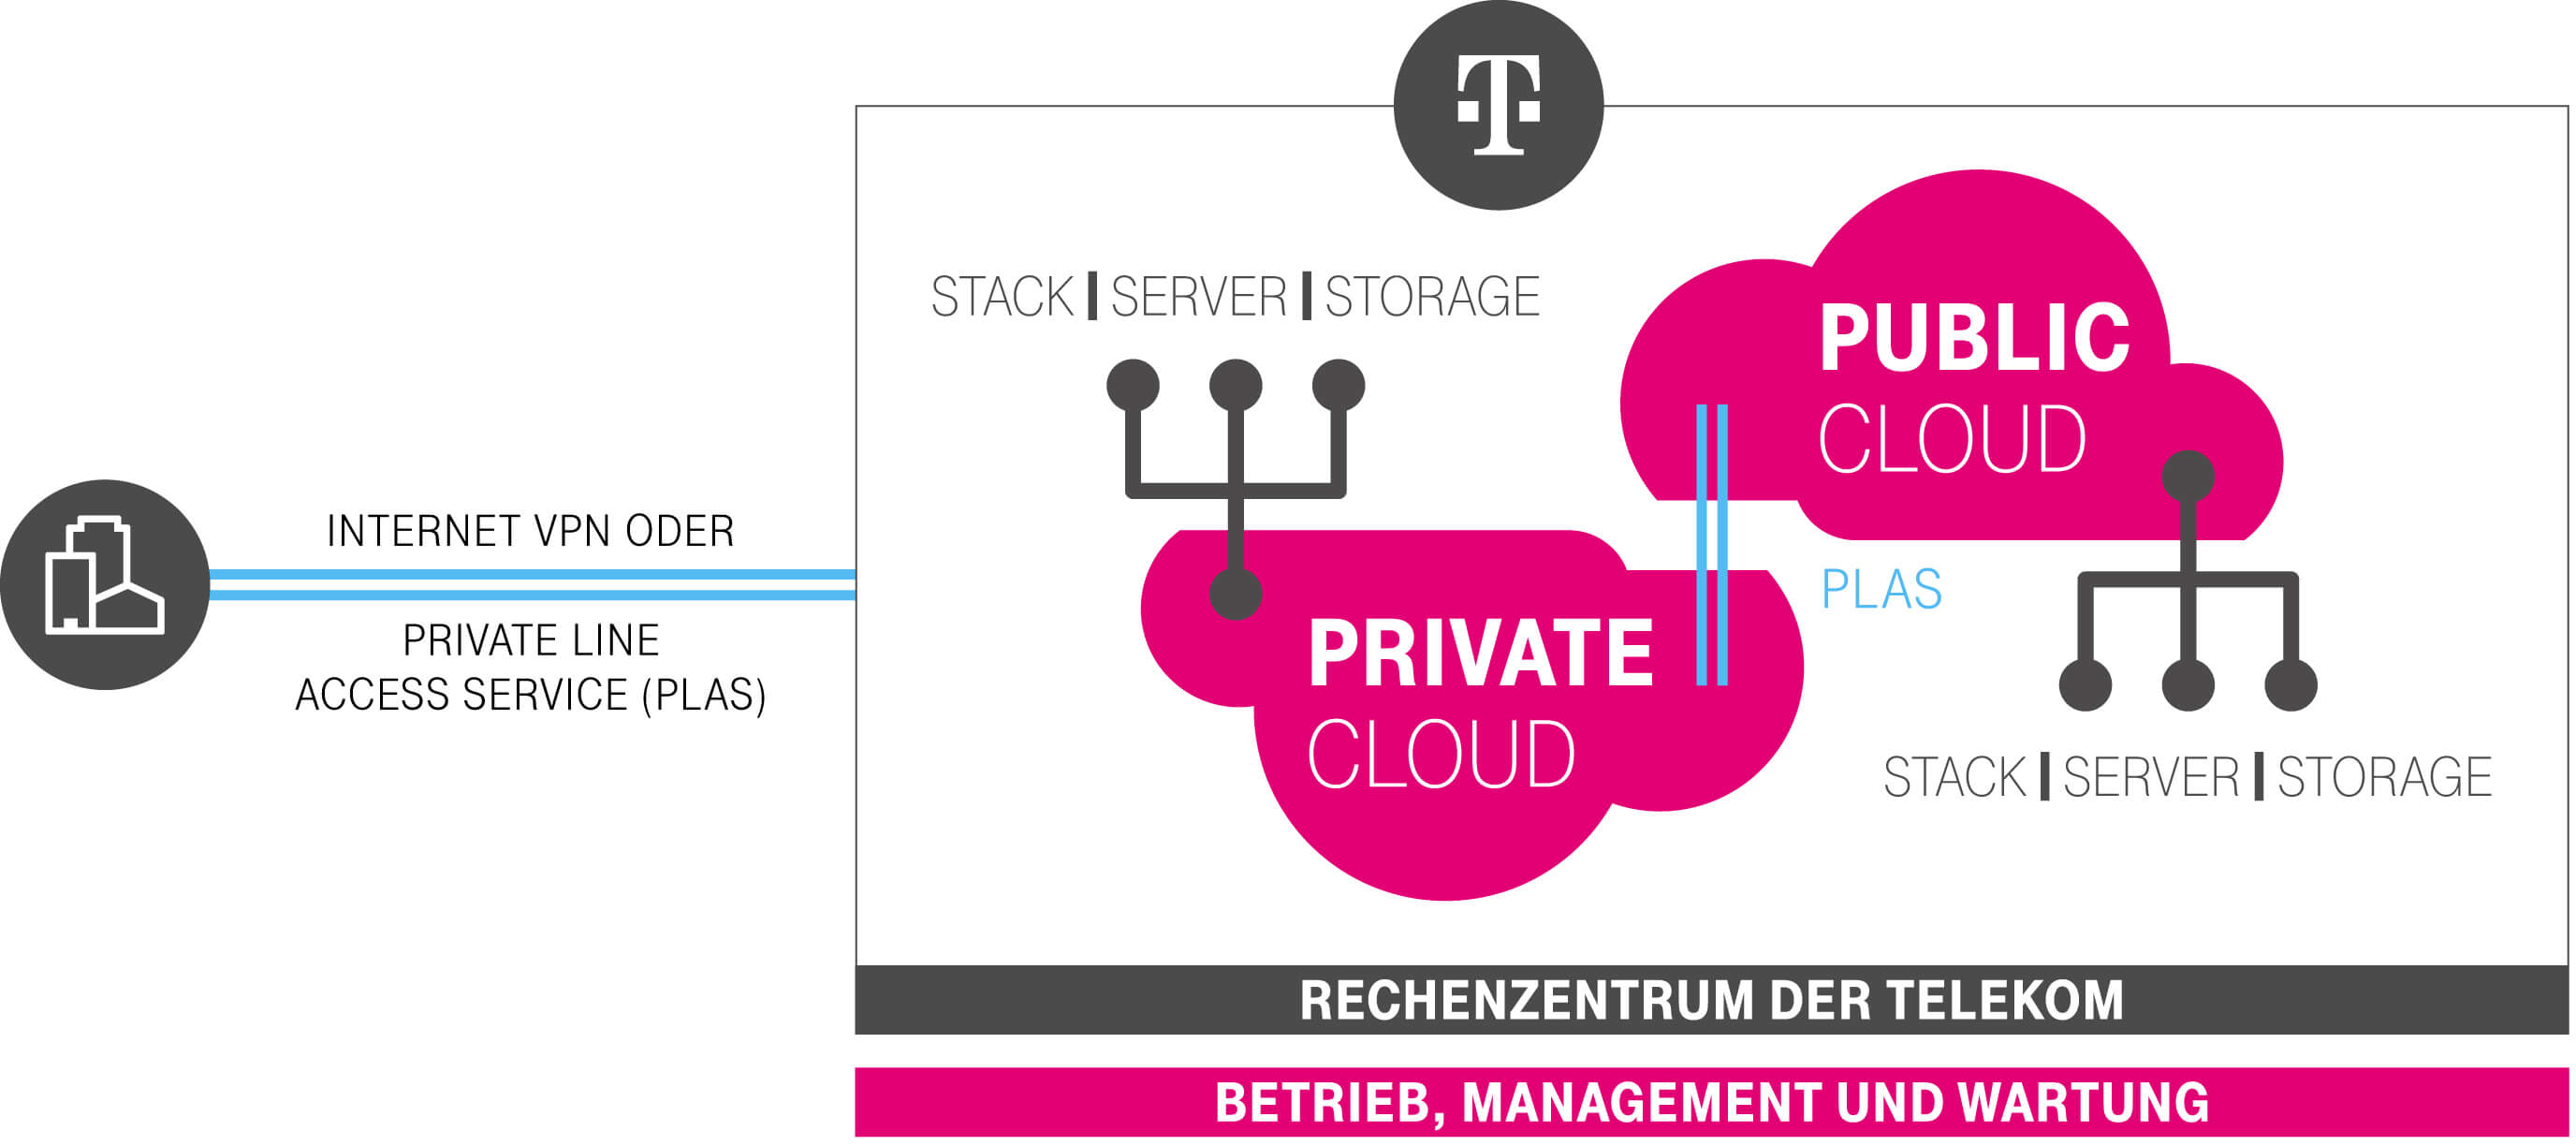 Open Telekom Cloud Hybrid Solution is set up with the private cloud in a highly secure data center by Telekom